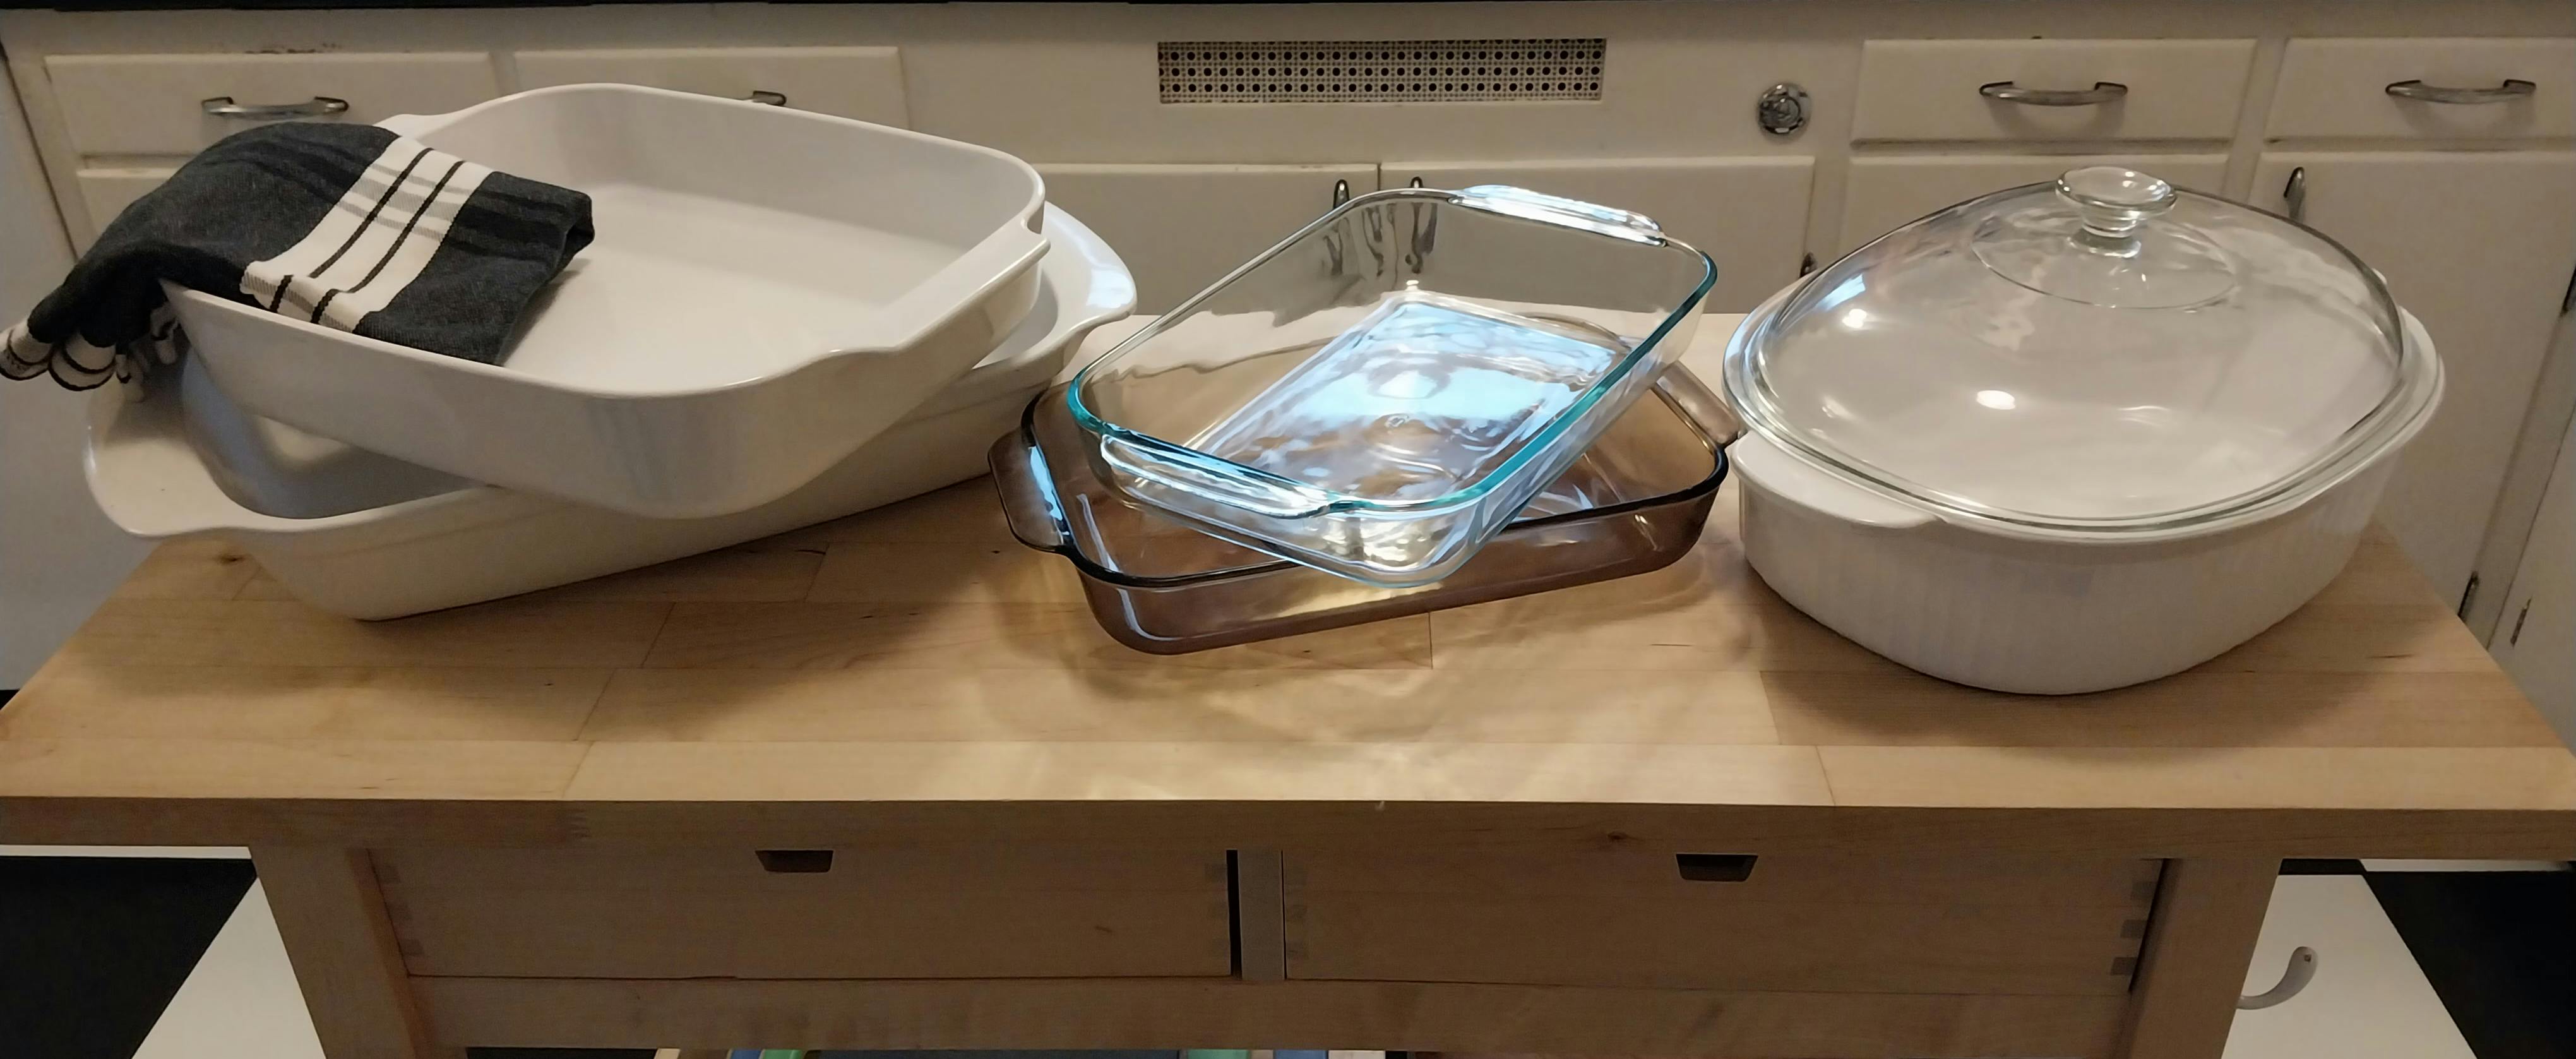 What to Look for When Buying a Casserole Dish